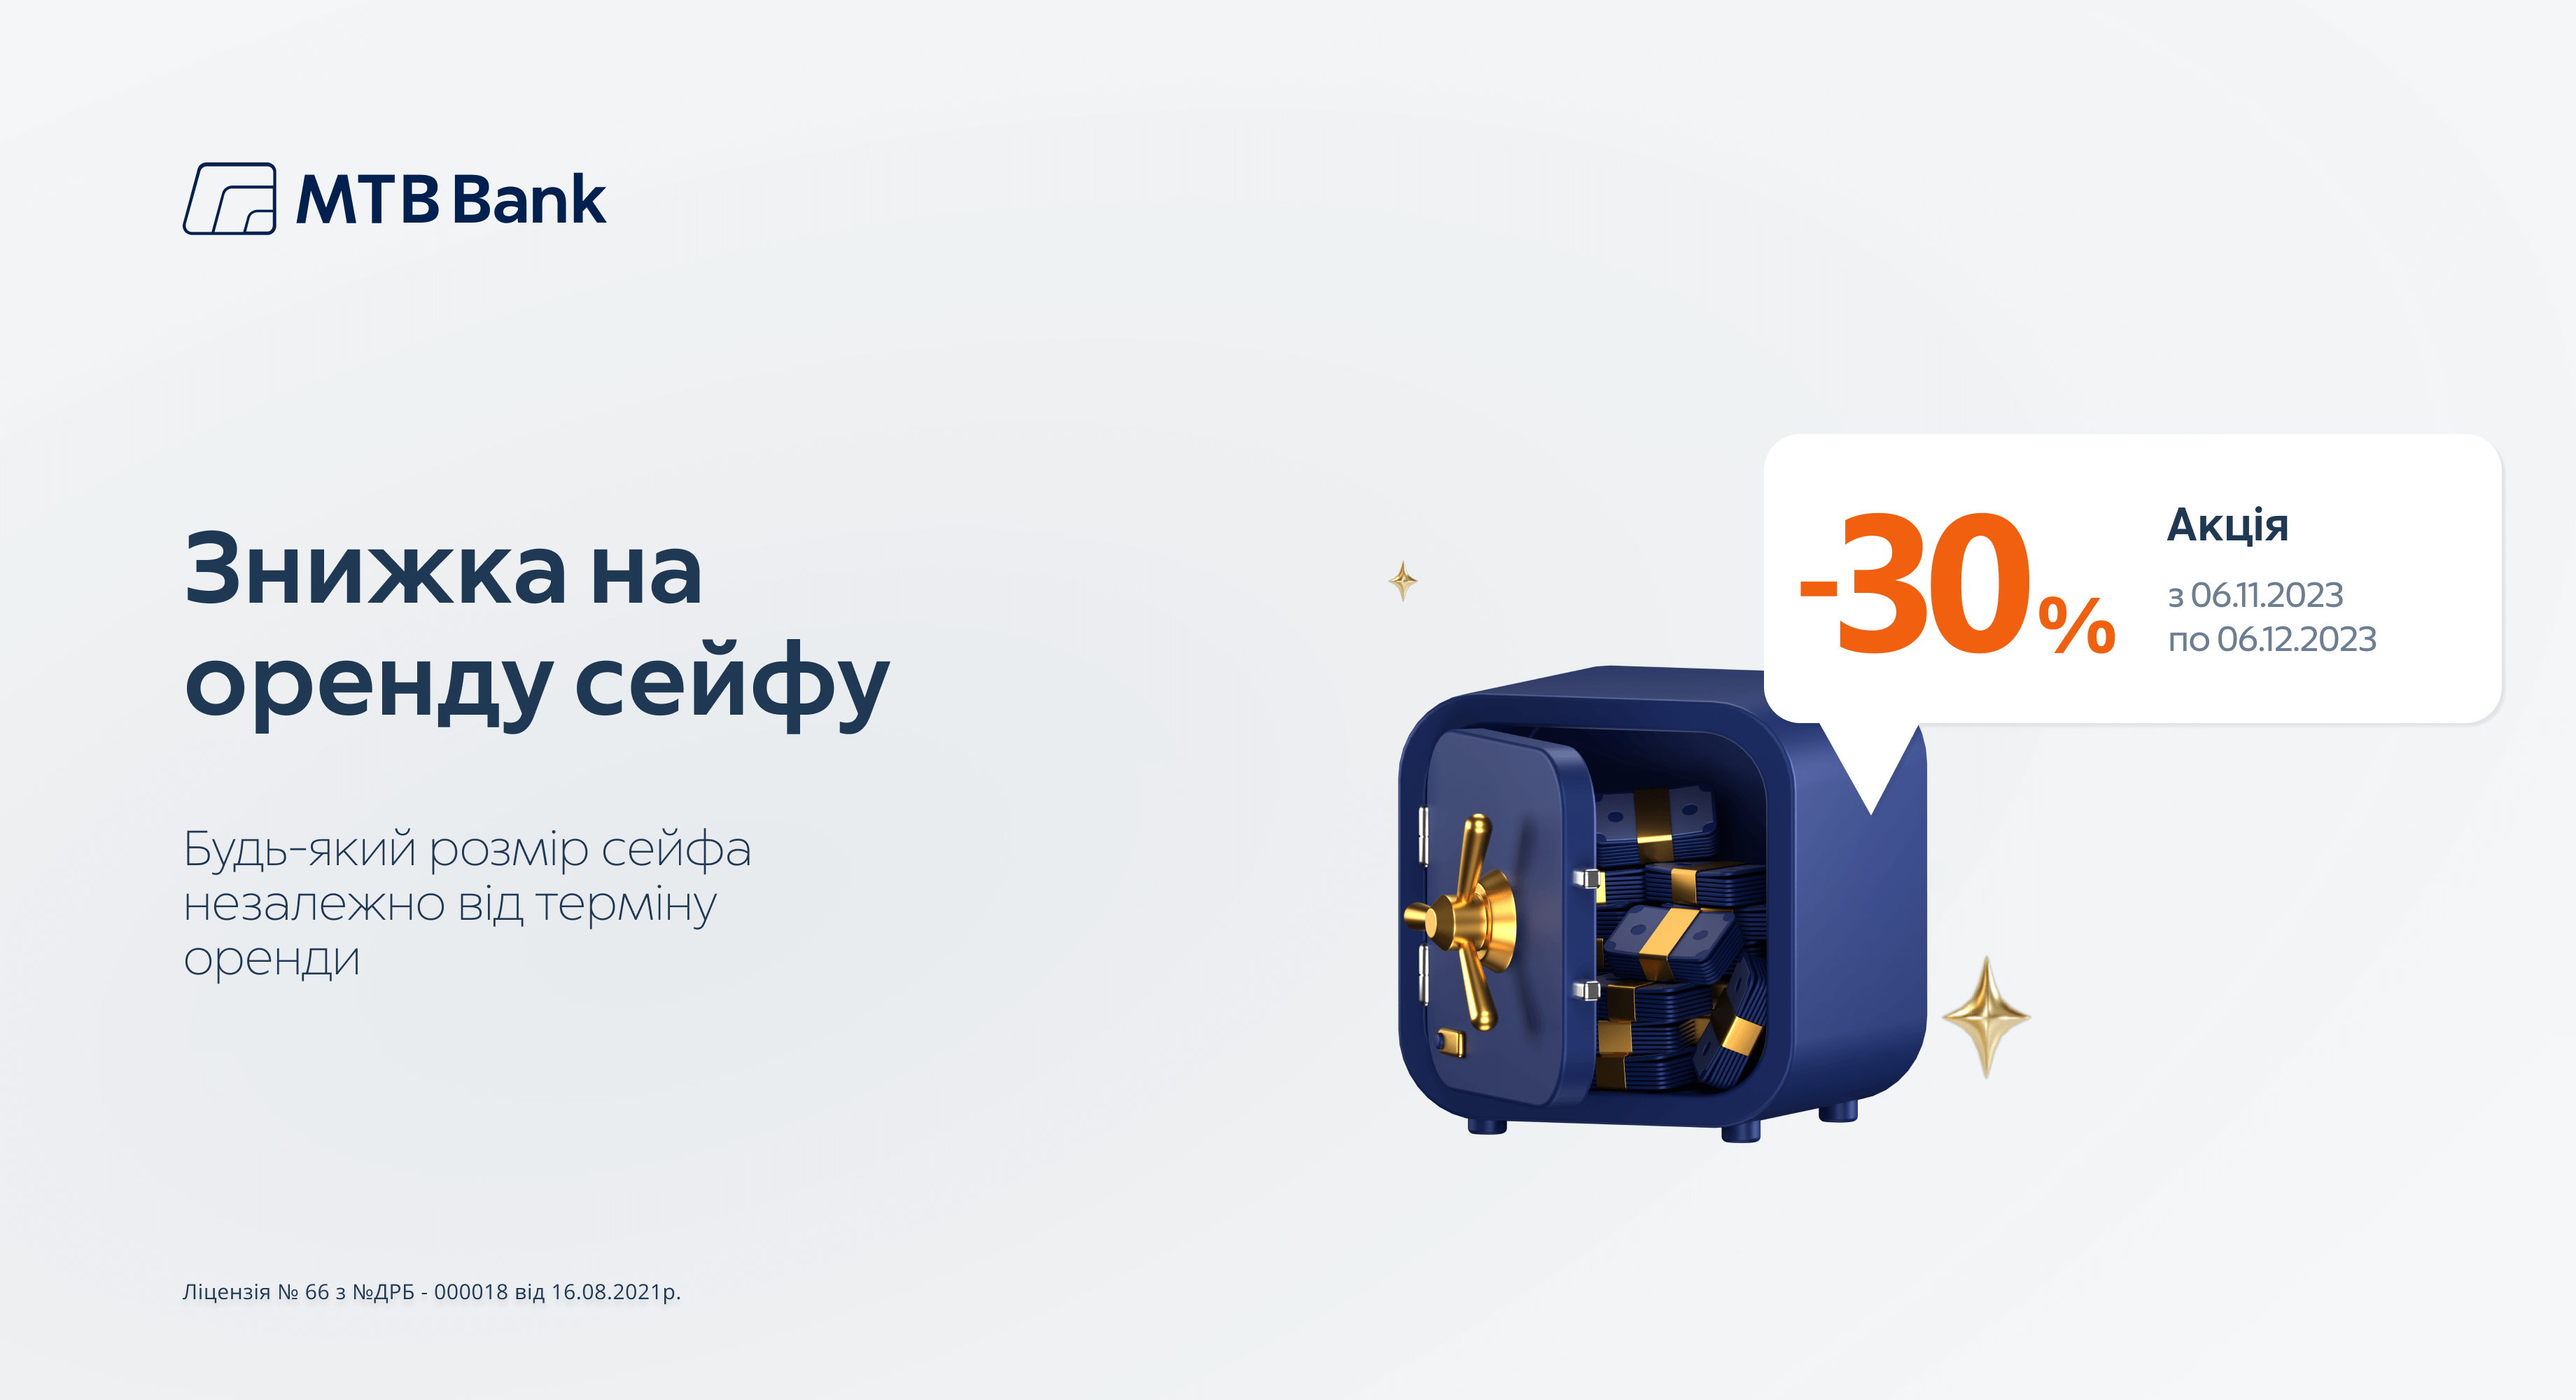 30 years of the Bank = 30% discount on the rental of bank safes! - photo - mtb.ua